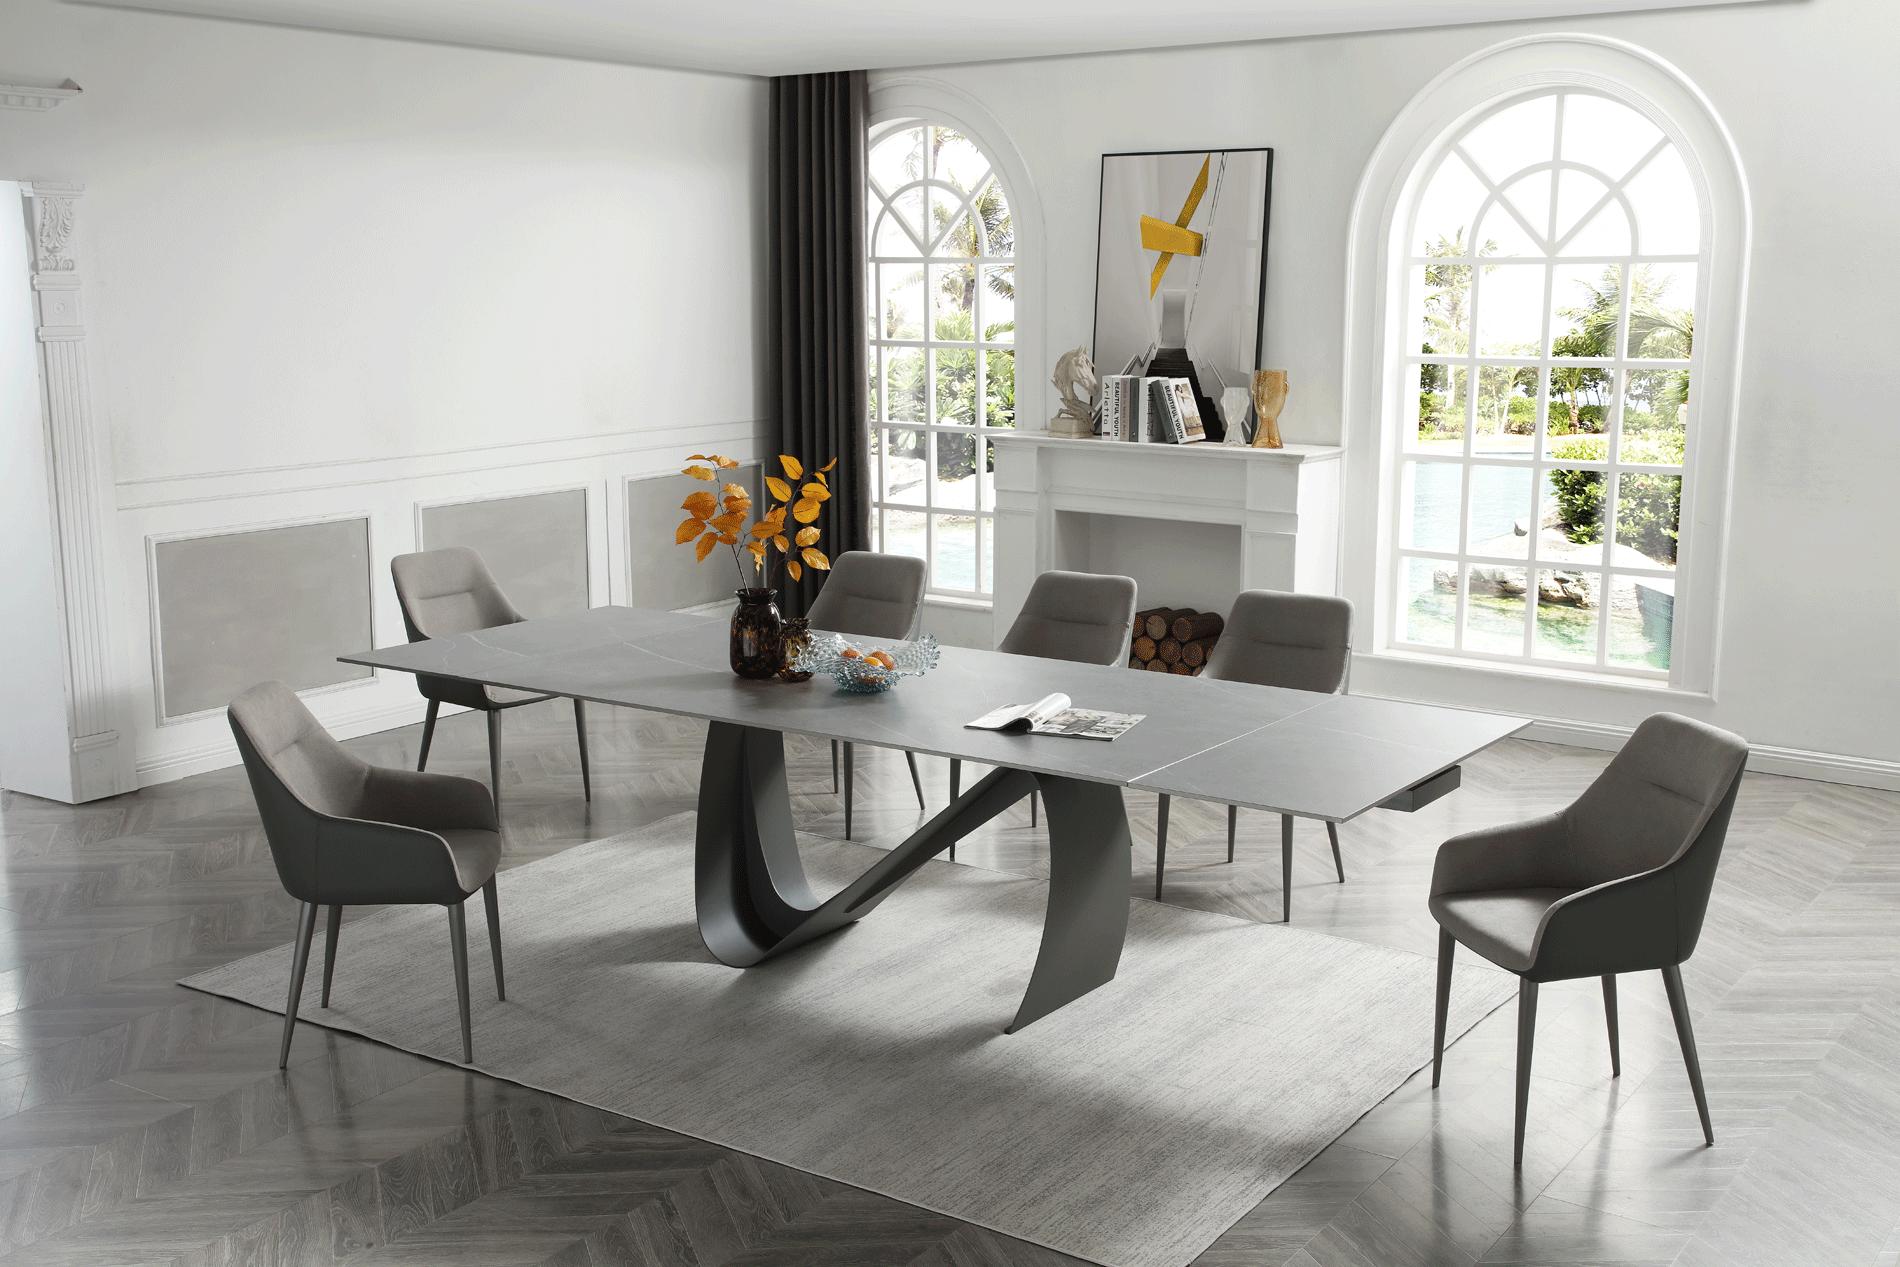 Contemporary Dining Chair Set Extravaganza Dining Room Set 7PCS 9087-DT-7PCS 9087-DT-7PCS in Dark Grey Eco Leather